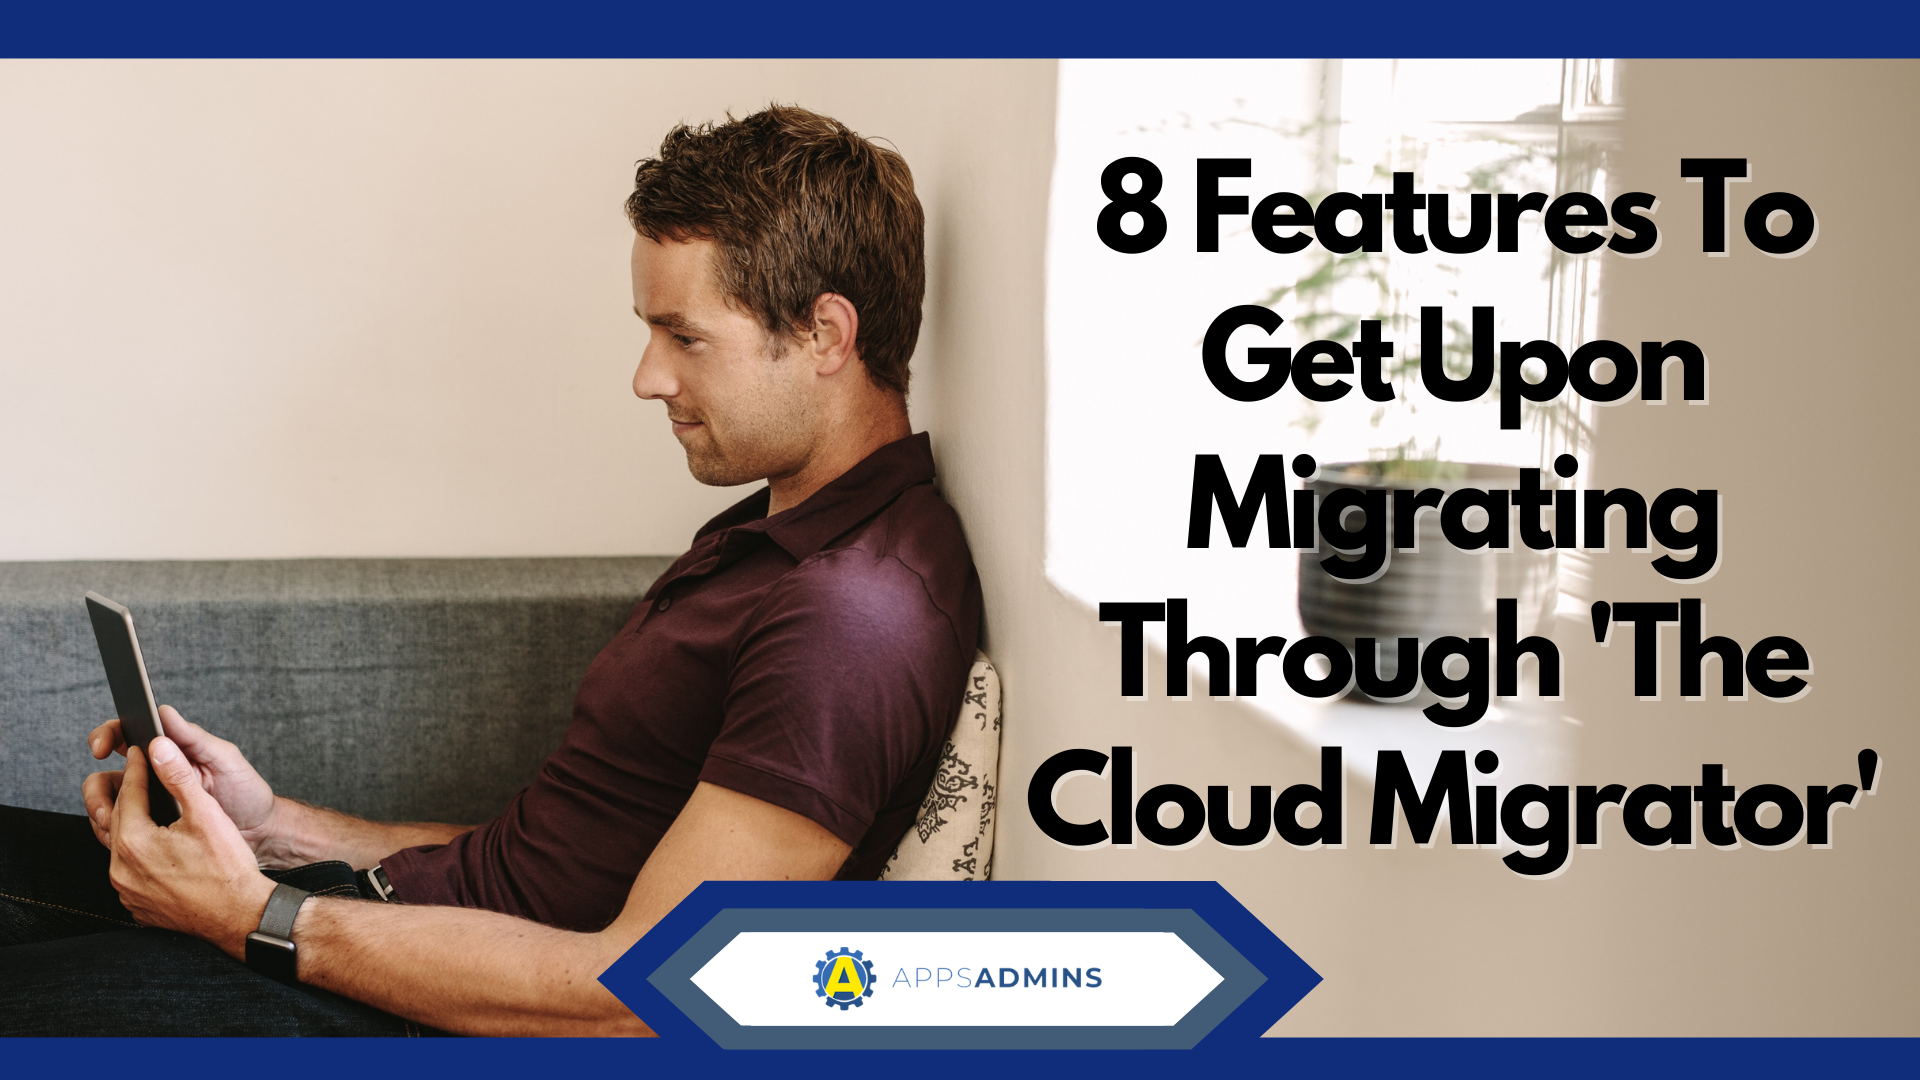 8 Features To Get When Using The Cloud Migrator (1)